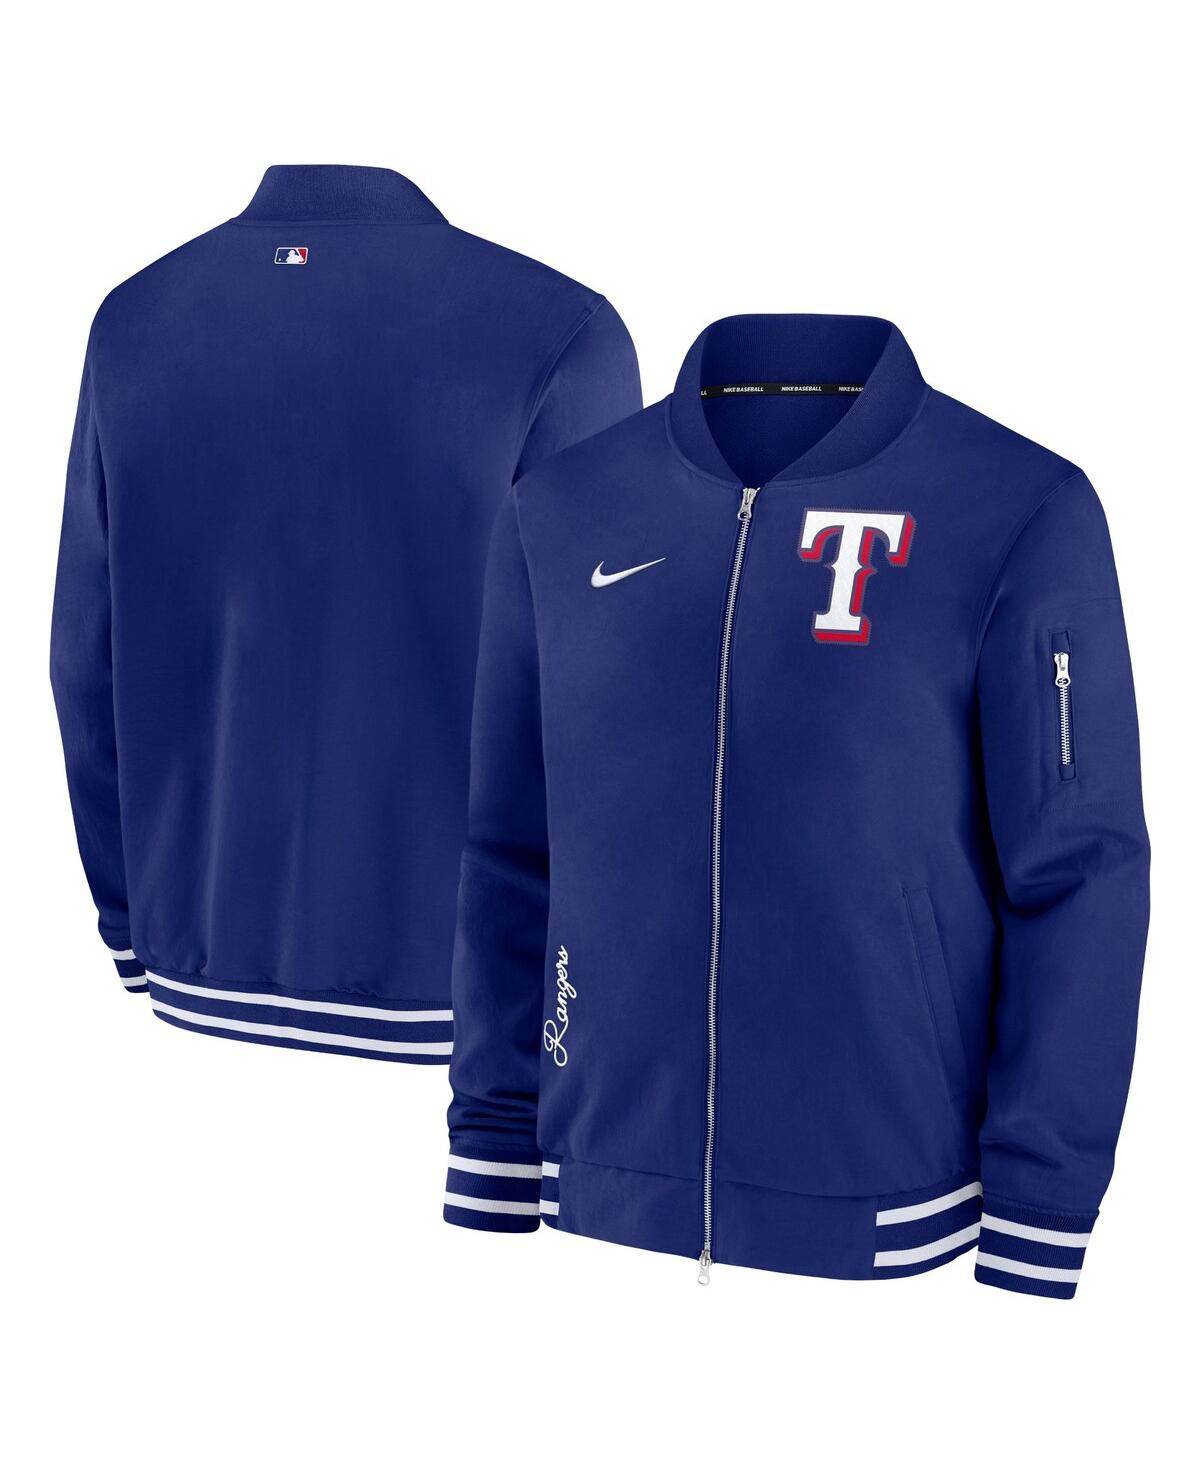 Men's Nike Royal Texas Rangers Authentic Collection Full-Zip Bomber Jacket - Royal